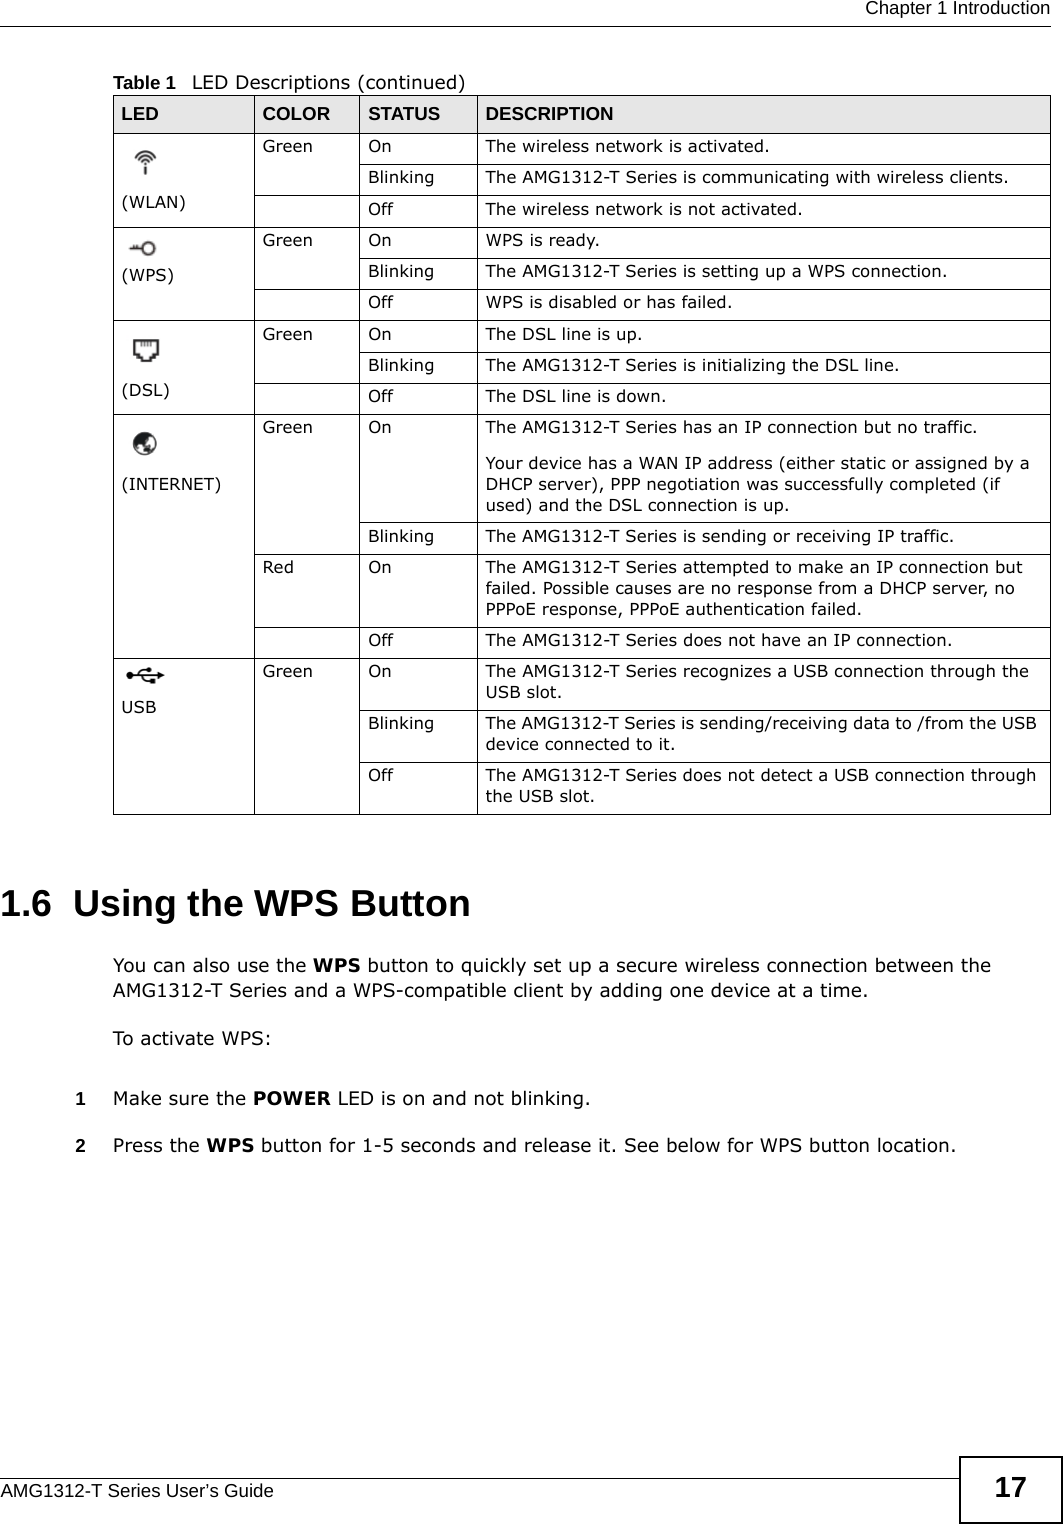  Chapter 1 IntroductionAMG1312-T Series User’s Guide 171.6  Using the WPS ButtonYou can also use the WPS button to quickly set up a secure wireless connection between theAMG1312-T Series and a WPS-compatible client by adding one device at a time.To activate WPS:1Make sure the POWER LED is on and not blinking.2Press the WPS button for 1-5 seconds and release it. See below for WPS button location.(WLAN)Green On The wireless network is activated.Blinking The AMG1312-T Series is communicating with wireless clients.Off The wireless network is not activated.(WPS)Green On WPS is ready.Blinking The AMG1312-T Series is setting up a WPS connection.Off WPS is disabled or has failed.(DSL)Green On The DSL line is up.Blinking The AMG1312-T Series is initializing the DSL line.Off The DSL line is down.(INTERNET)Green On The AMG1312-T Series has an IP connection but no traffic.Your device has a WAN IP address (either static or assigned by a DHCP server), PPP negotiation was successfully completed (if used) and the DSL connection is up.Blinking The AMG1312-T Series is sending or receiving IP traffic.Red On The AMG1312-T Series attempted to make an IP connection but failed. Possible causes are no response from a DHCP server, no PPPoE response, PPPoE authentication failed.Off The AMG1312-T Series does not have an IP connection.USBGreen On The AMG1312-T Series recognizes a USB connection through the USB slot.Blinking The AMG1312-T Series is sending/receiving data to /from the USB device connected to it.Off The AMG1312-T Series does not detect a USB connection through the USB slot.Table 1   LED Descriptions (continued)LED COLOR STATUS DESCRIPTION